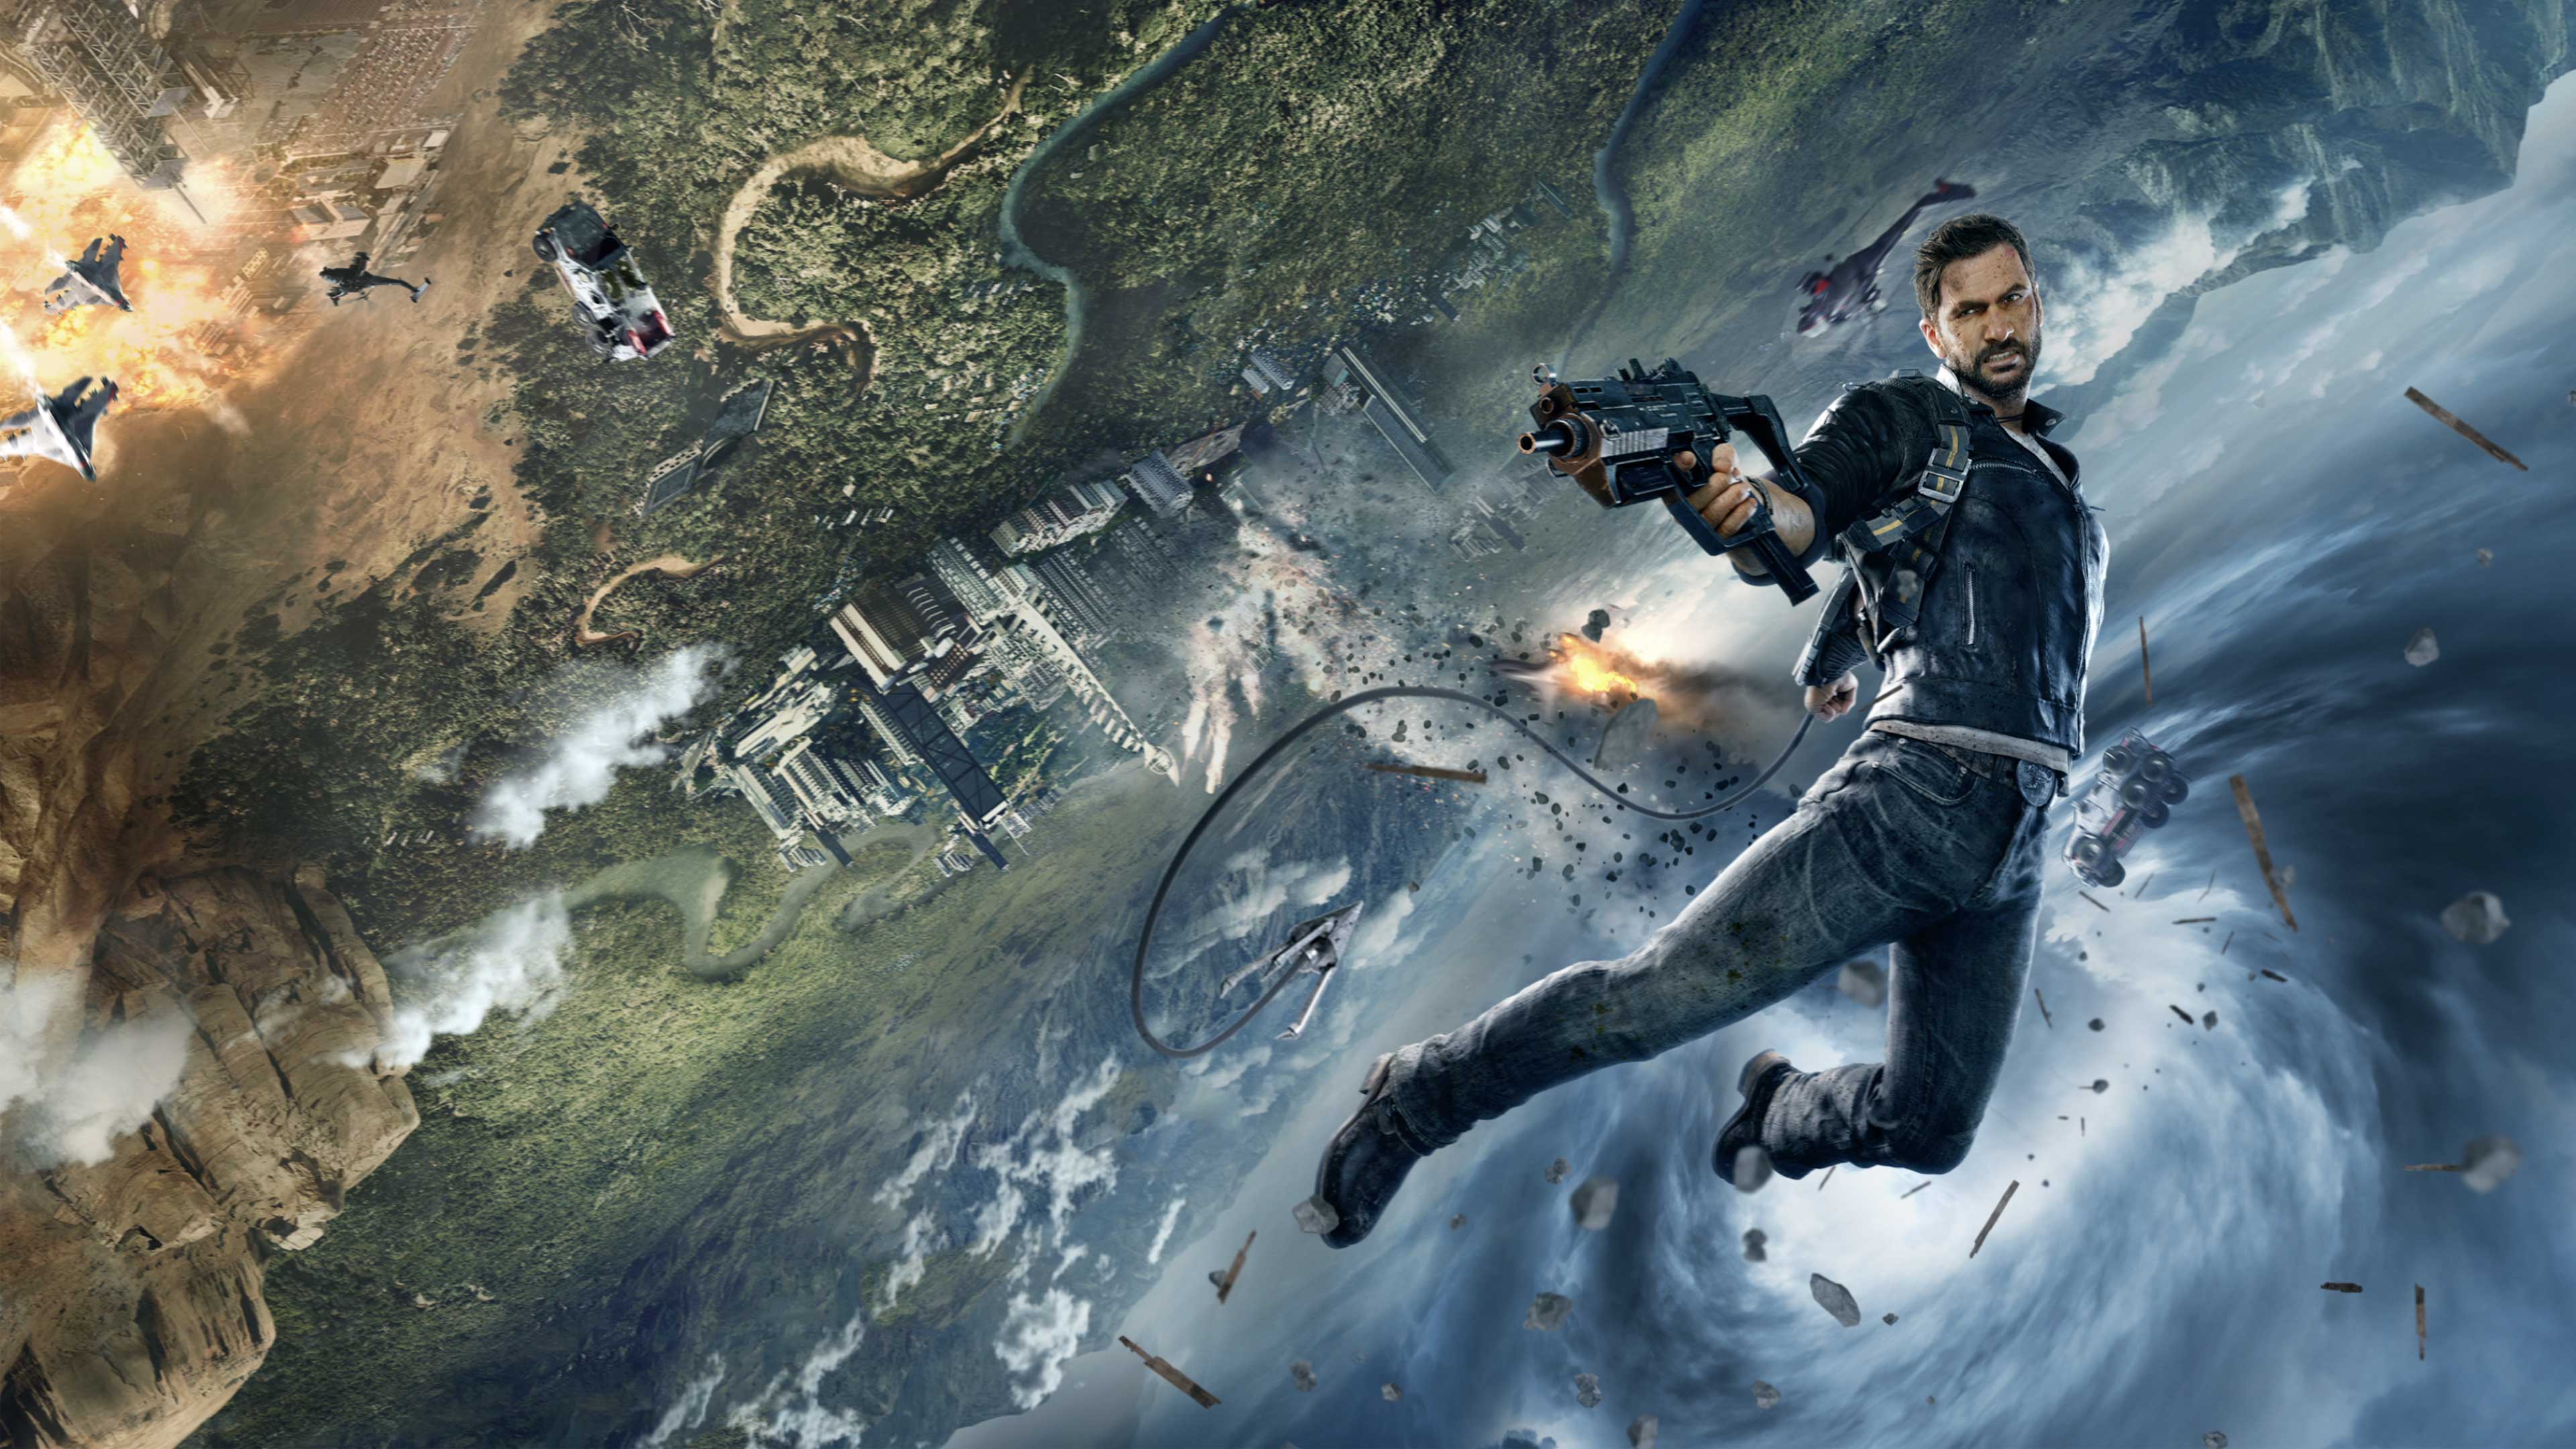 Media asset in full size related to 3dfxzone.it news item entitled as follows: Con un trailer Square Enix presenta trama e gameplay del game Just Cause 4 | Image Name: news28834_Just-Cause-4-Screenshot_1.jpg